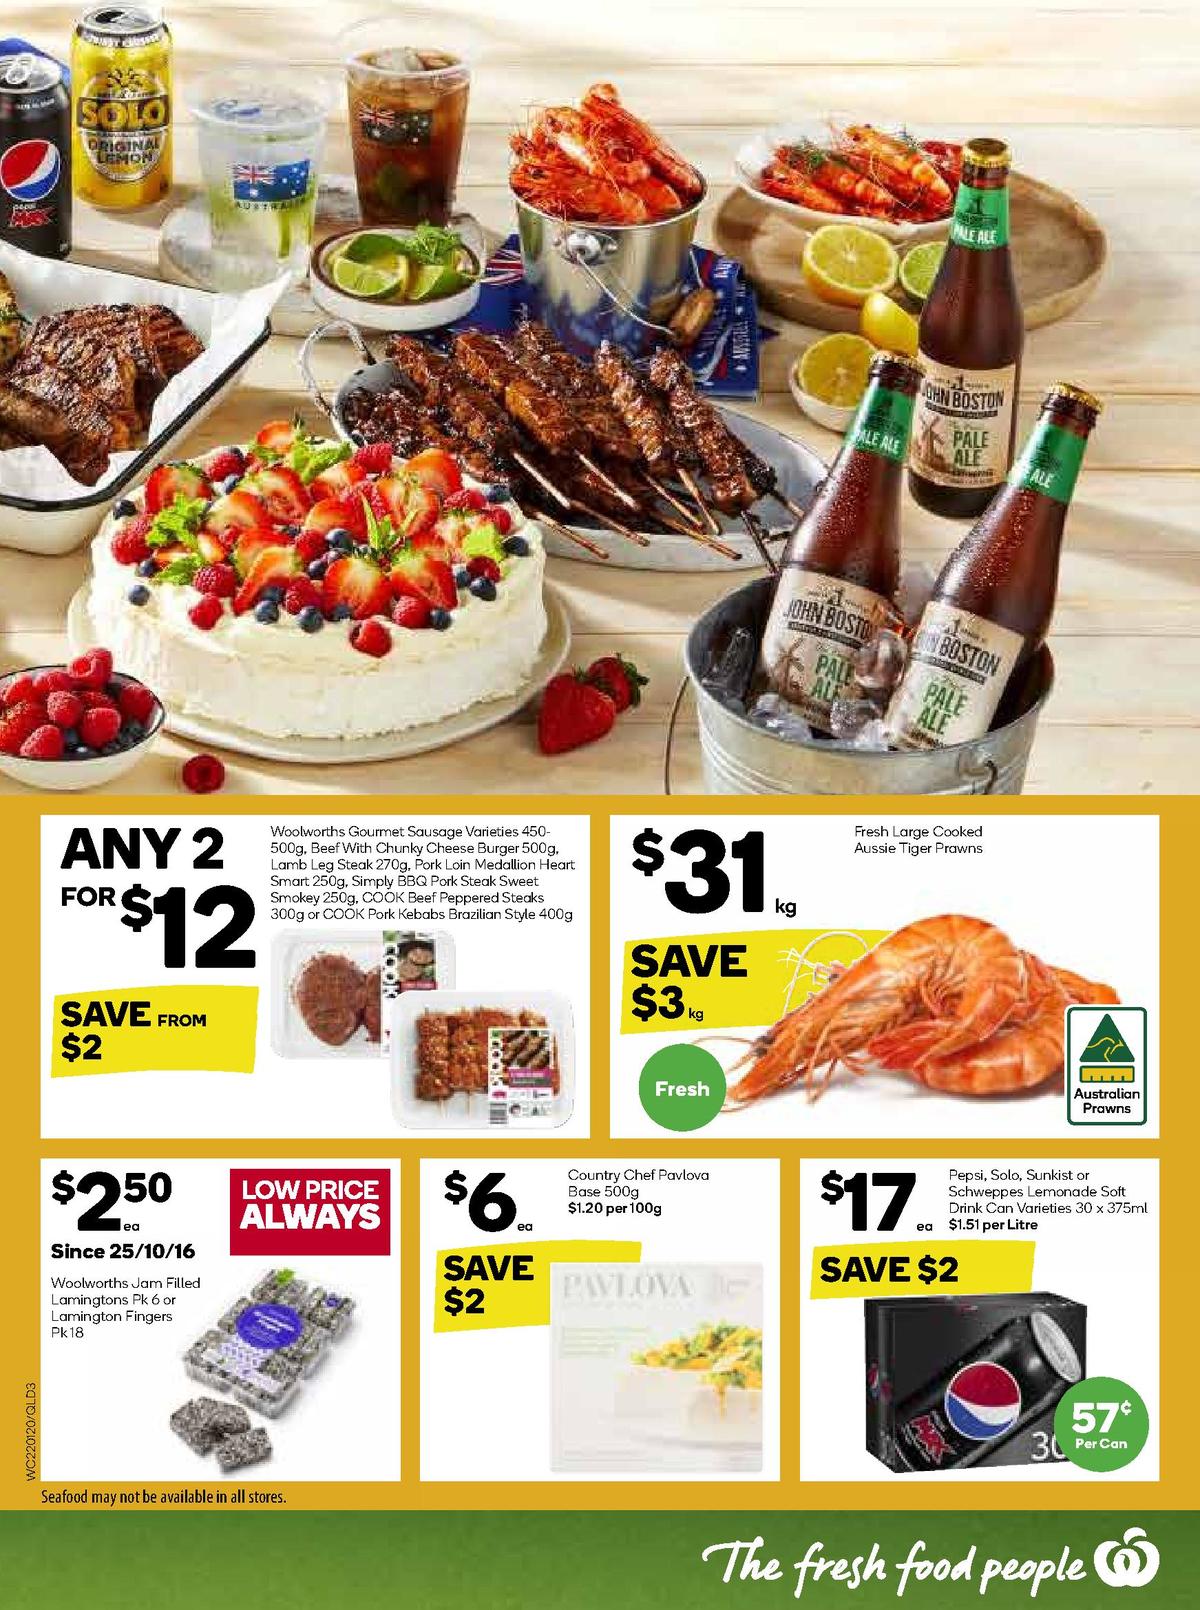 Woolworths Catalogues from 22 January